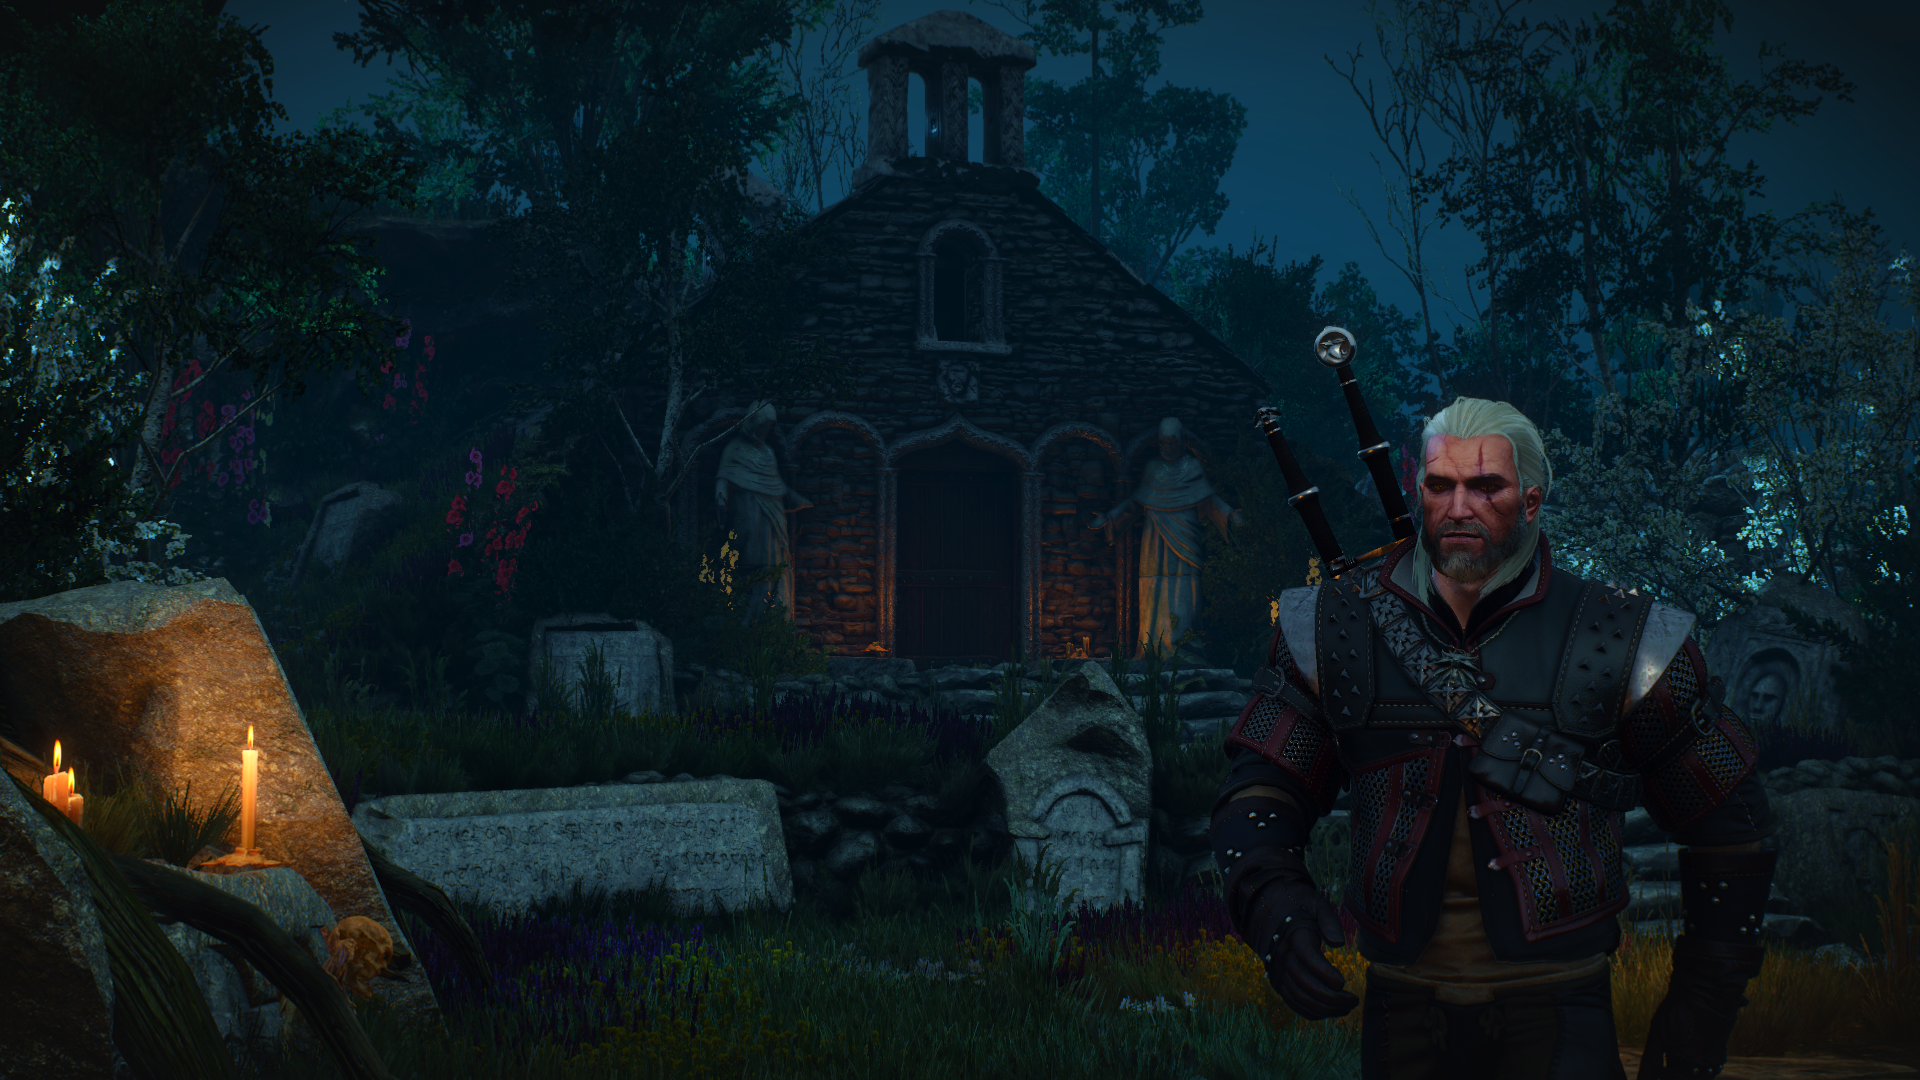 General 1920x1080 The Witcher 3: Wild Hunt Geralt of Rivia The White Wolf The Witcher video games video game characters CD Projekt RED book characters